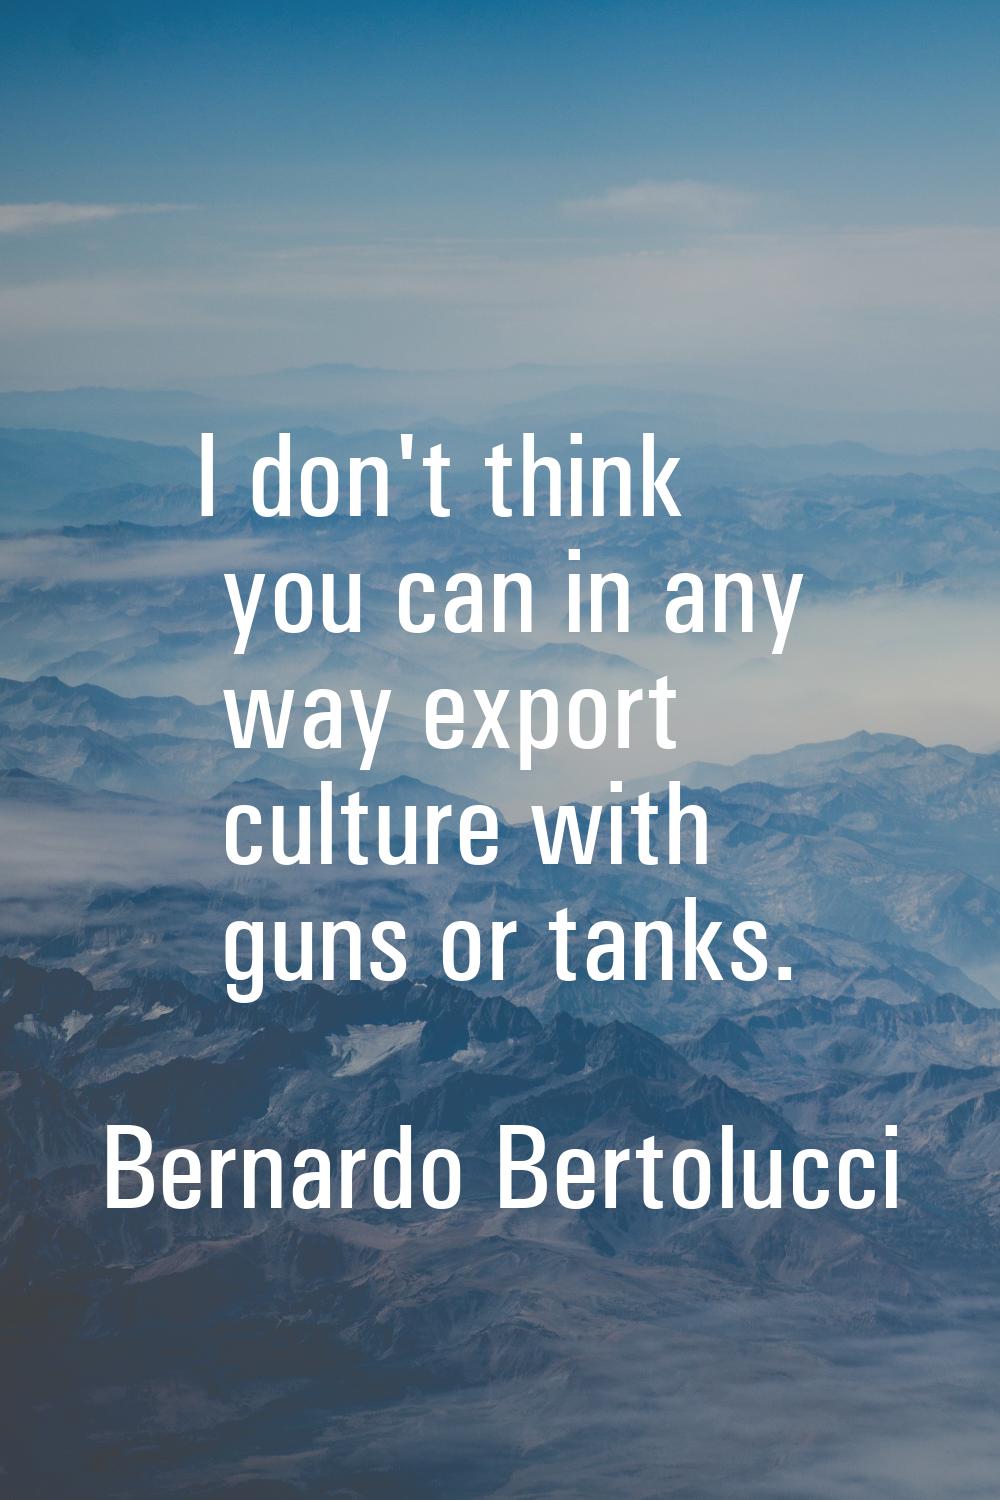 I don't think you can in any way export culture with guns or tanks.